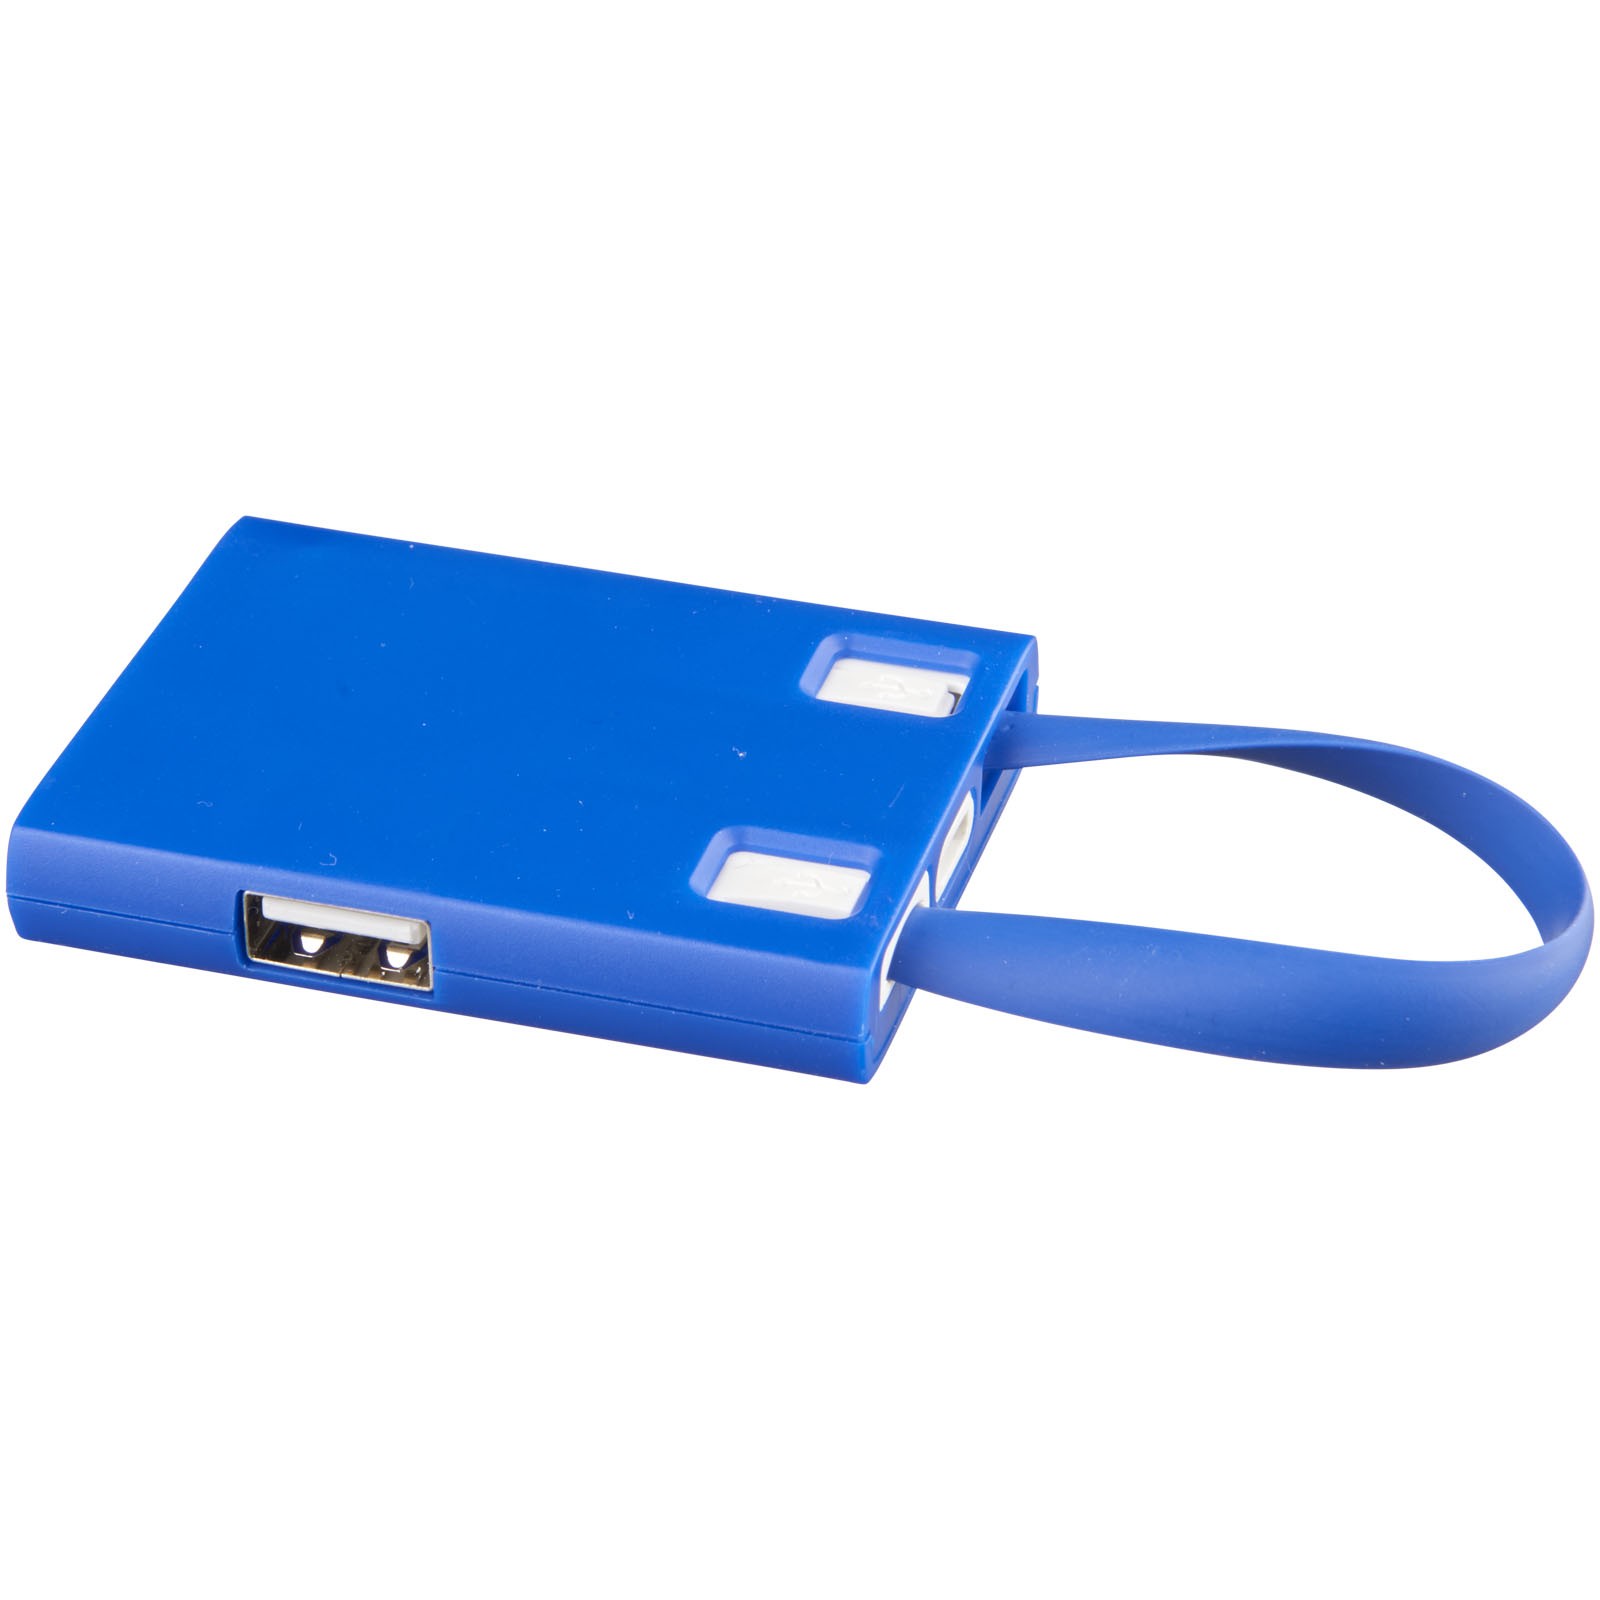 Revere 3-port USB hub with 3-in-1 cable - Royal Blue